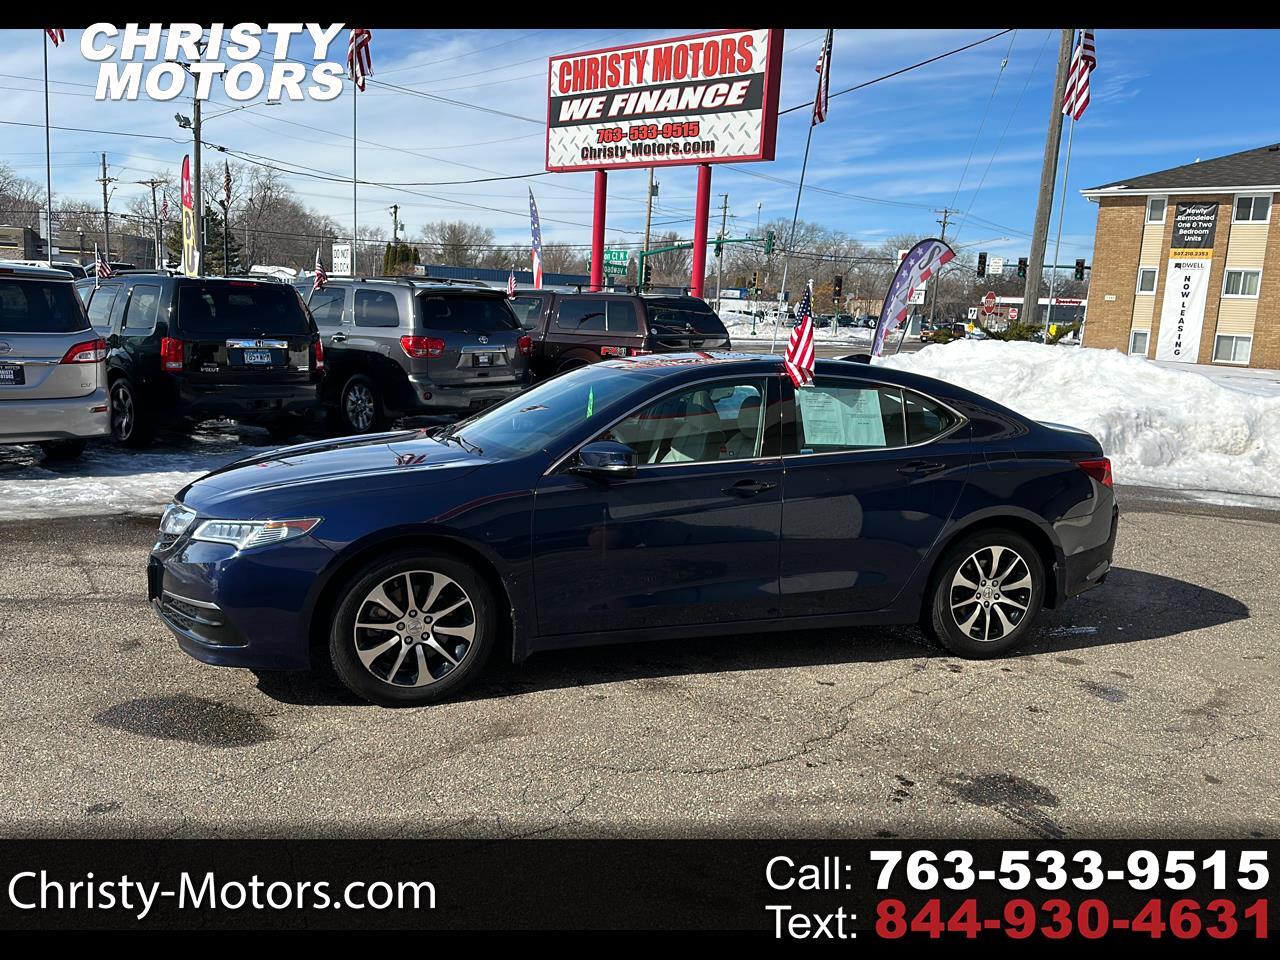 2015 Acura TLX 8-Spd DCT w/Technology Package